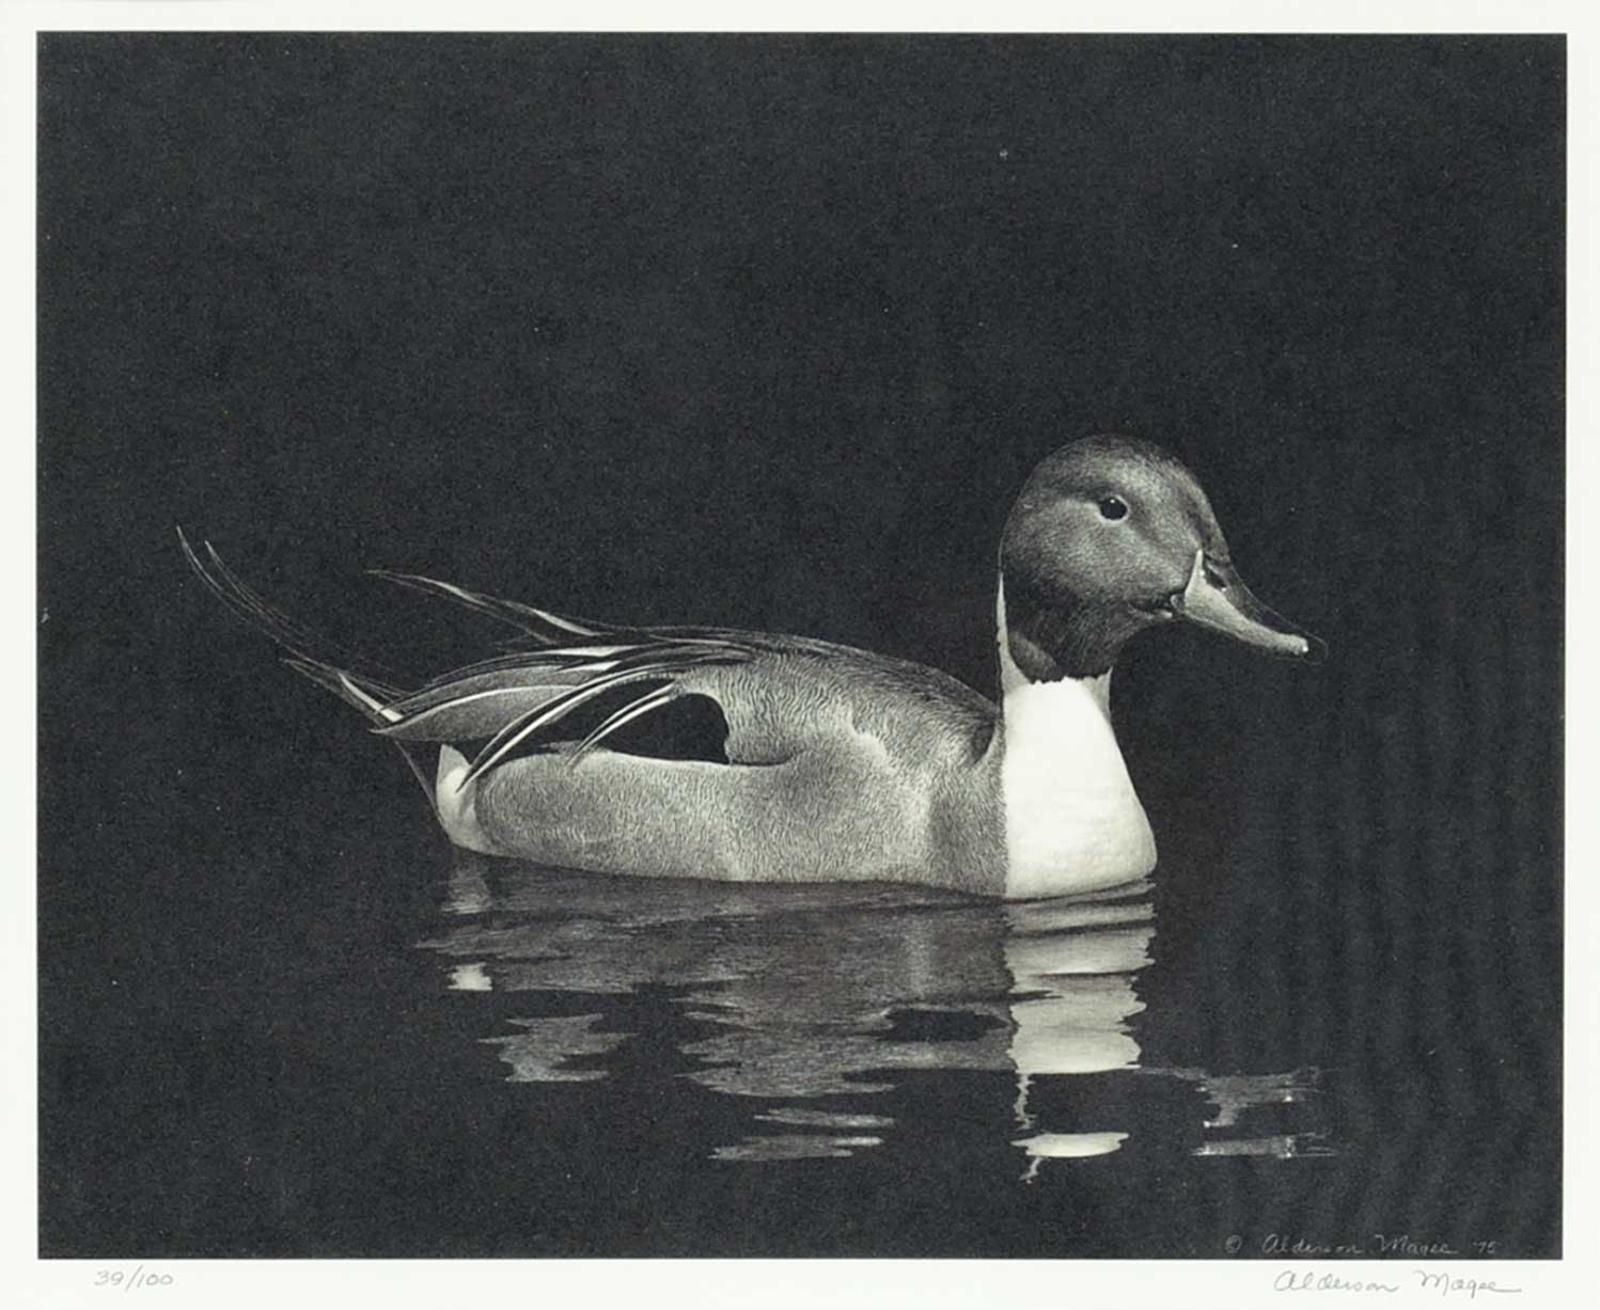 Alderson Magee - Untitled - Pintail  #39/100